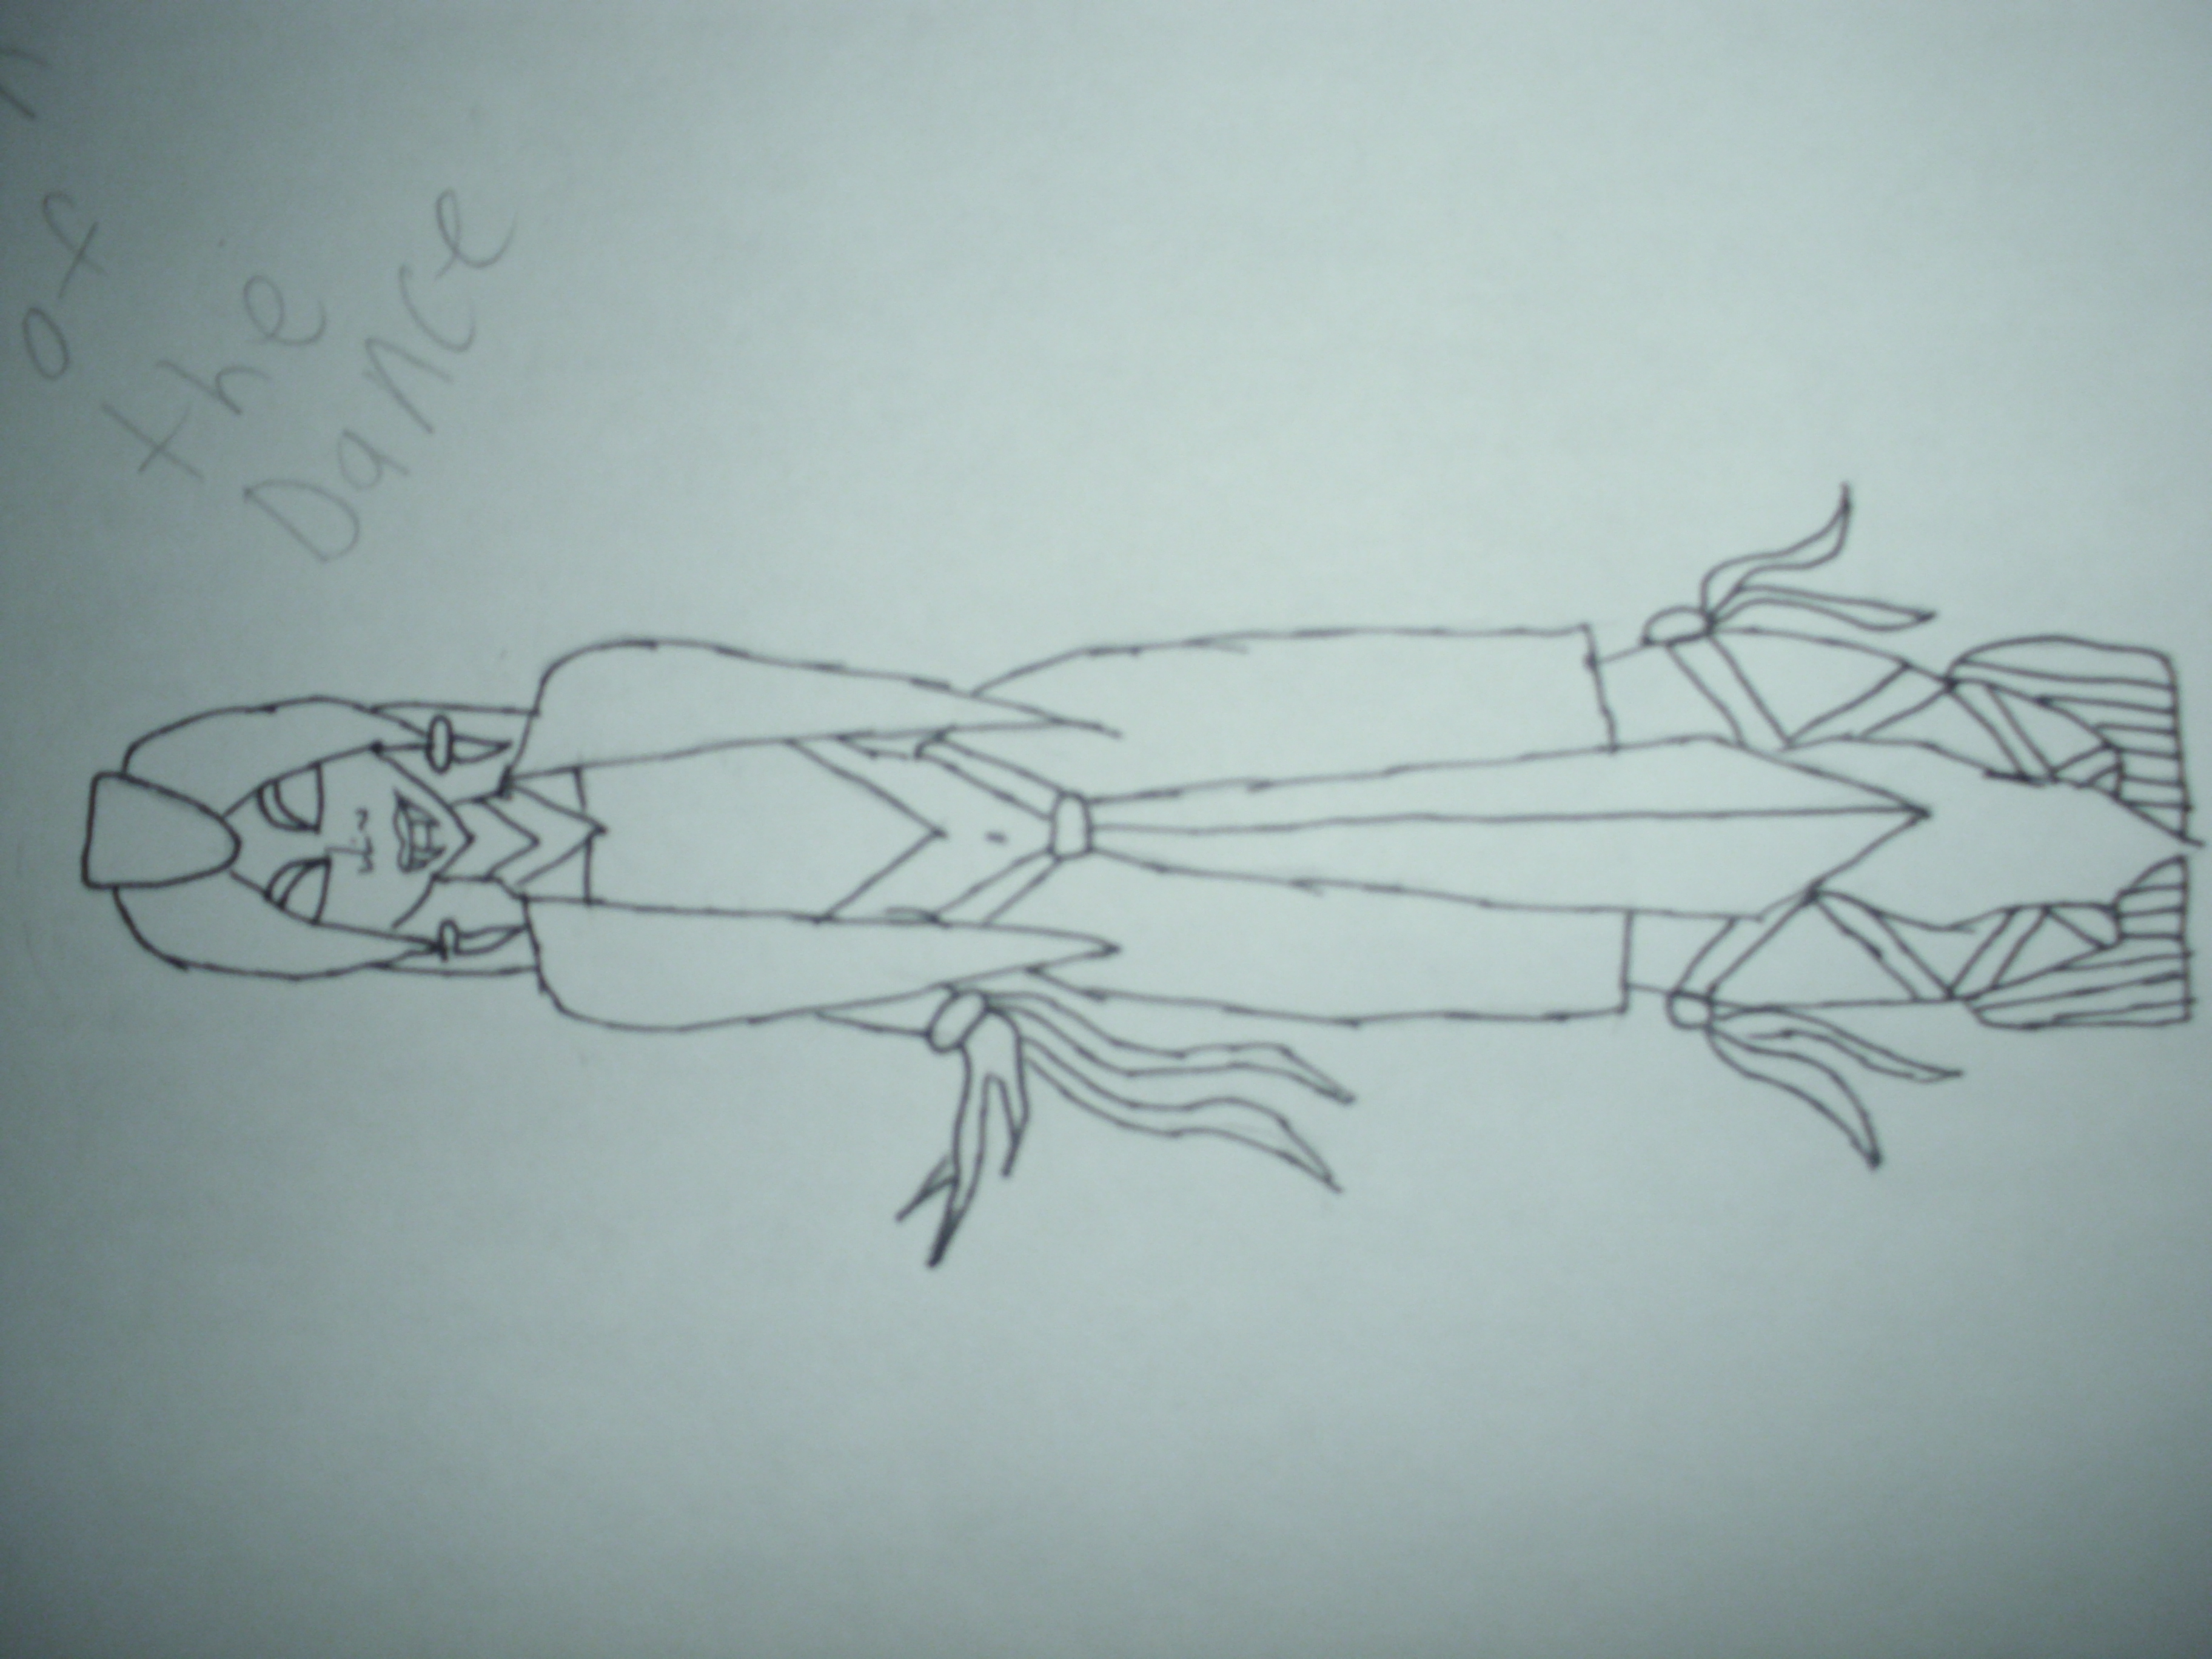 melesha dawn of the dance

man, have i gotten good at drawing monster high style